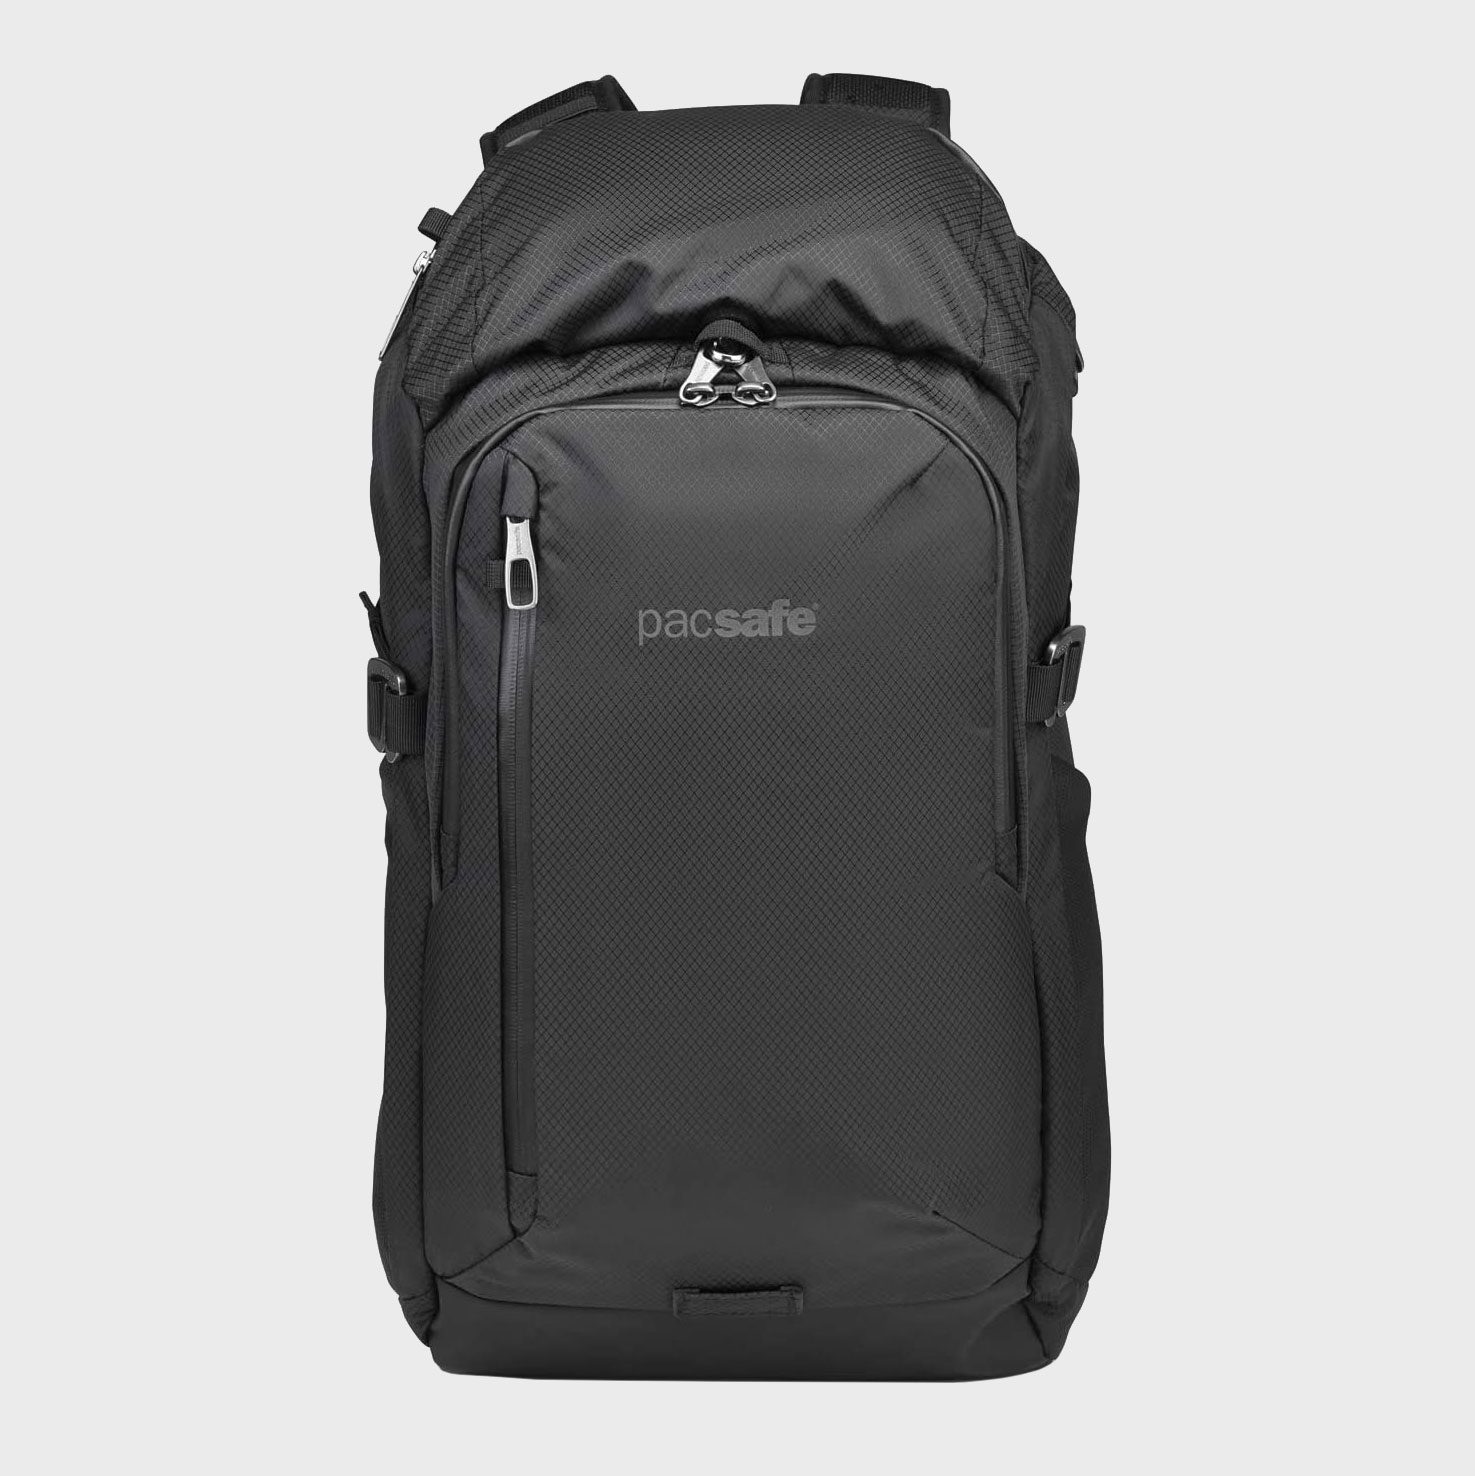 Lenovo Laptop Backpack B210, 15.6-Inch Laptop/Tablet, Durable,  Water-Repellent, Lightweight, Clean Design, Sleek for Travel, Business  Casual or